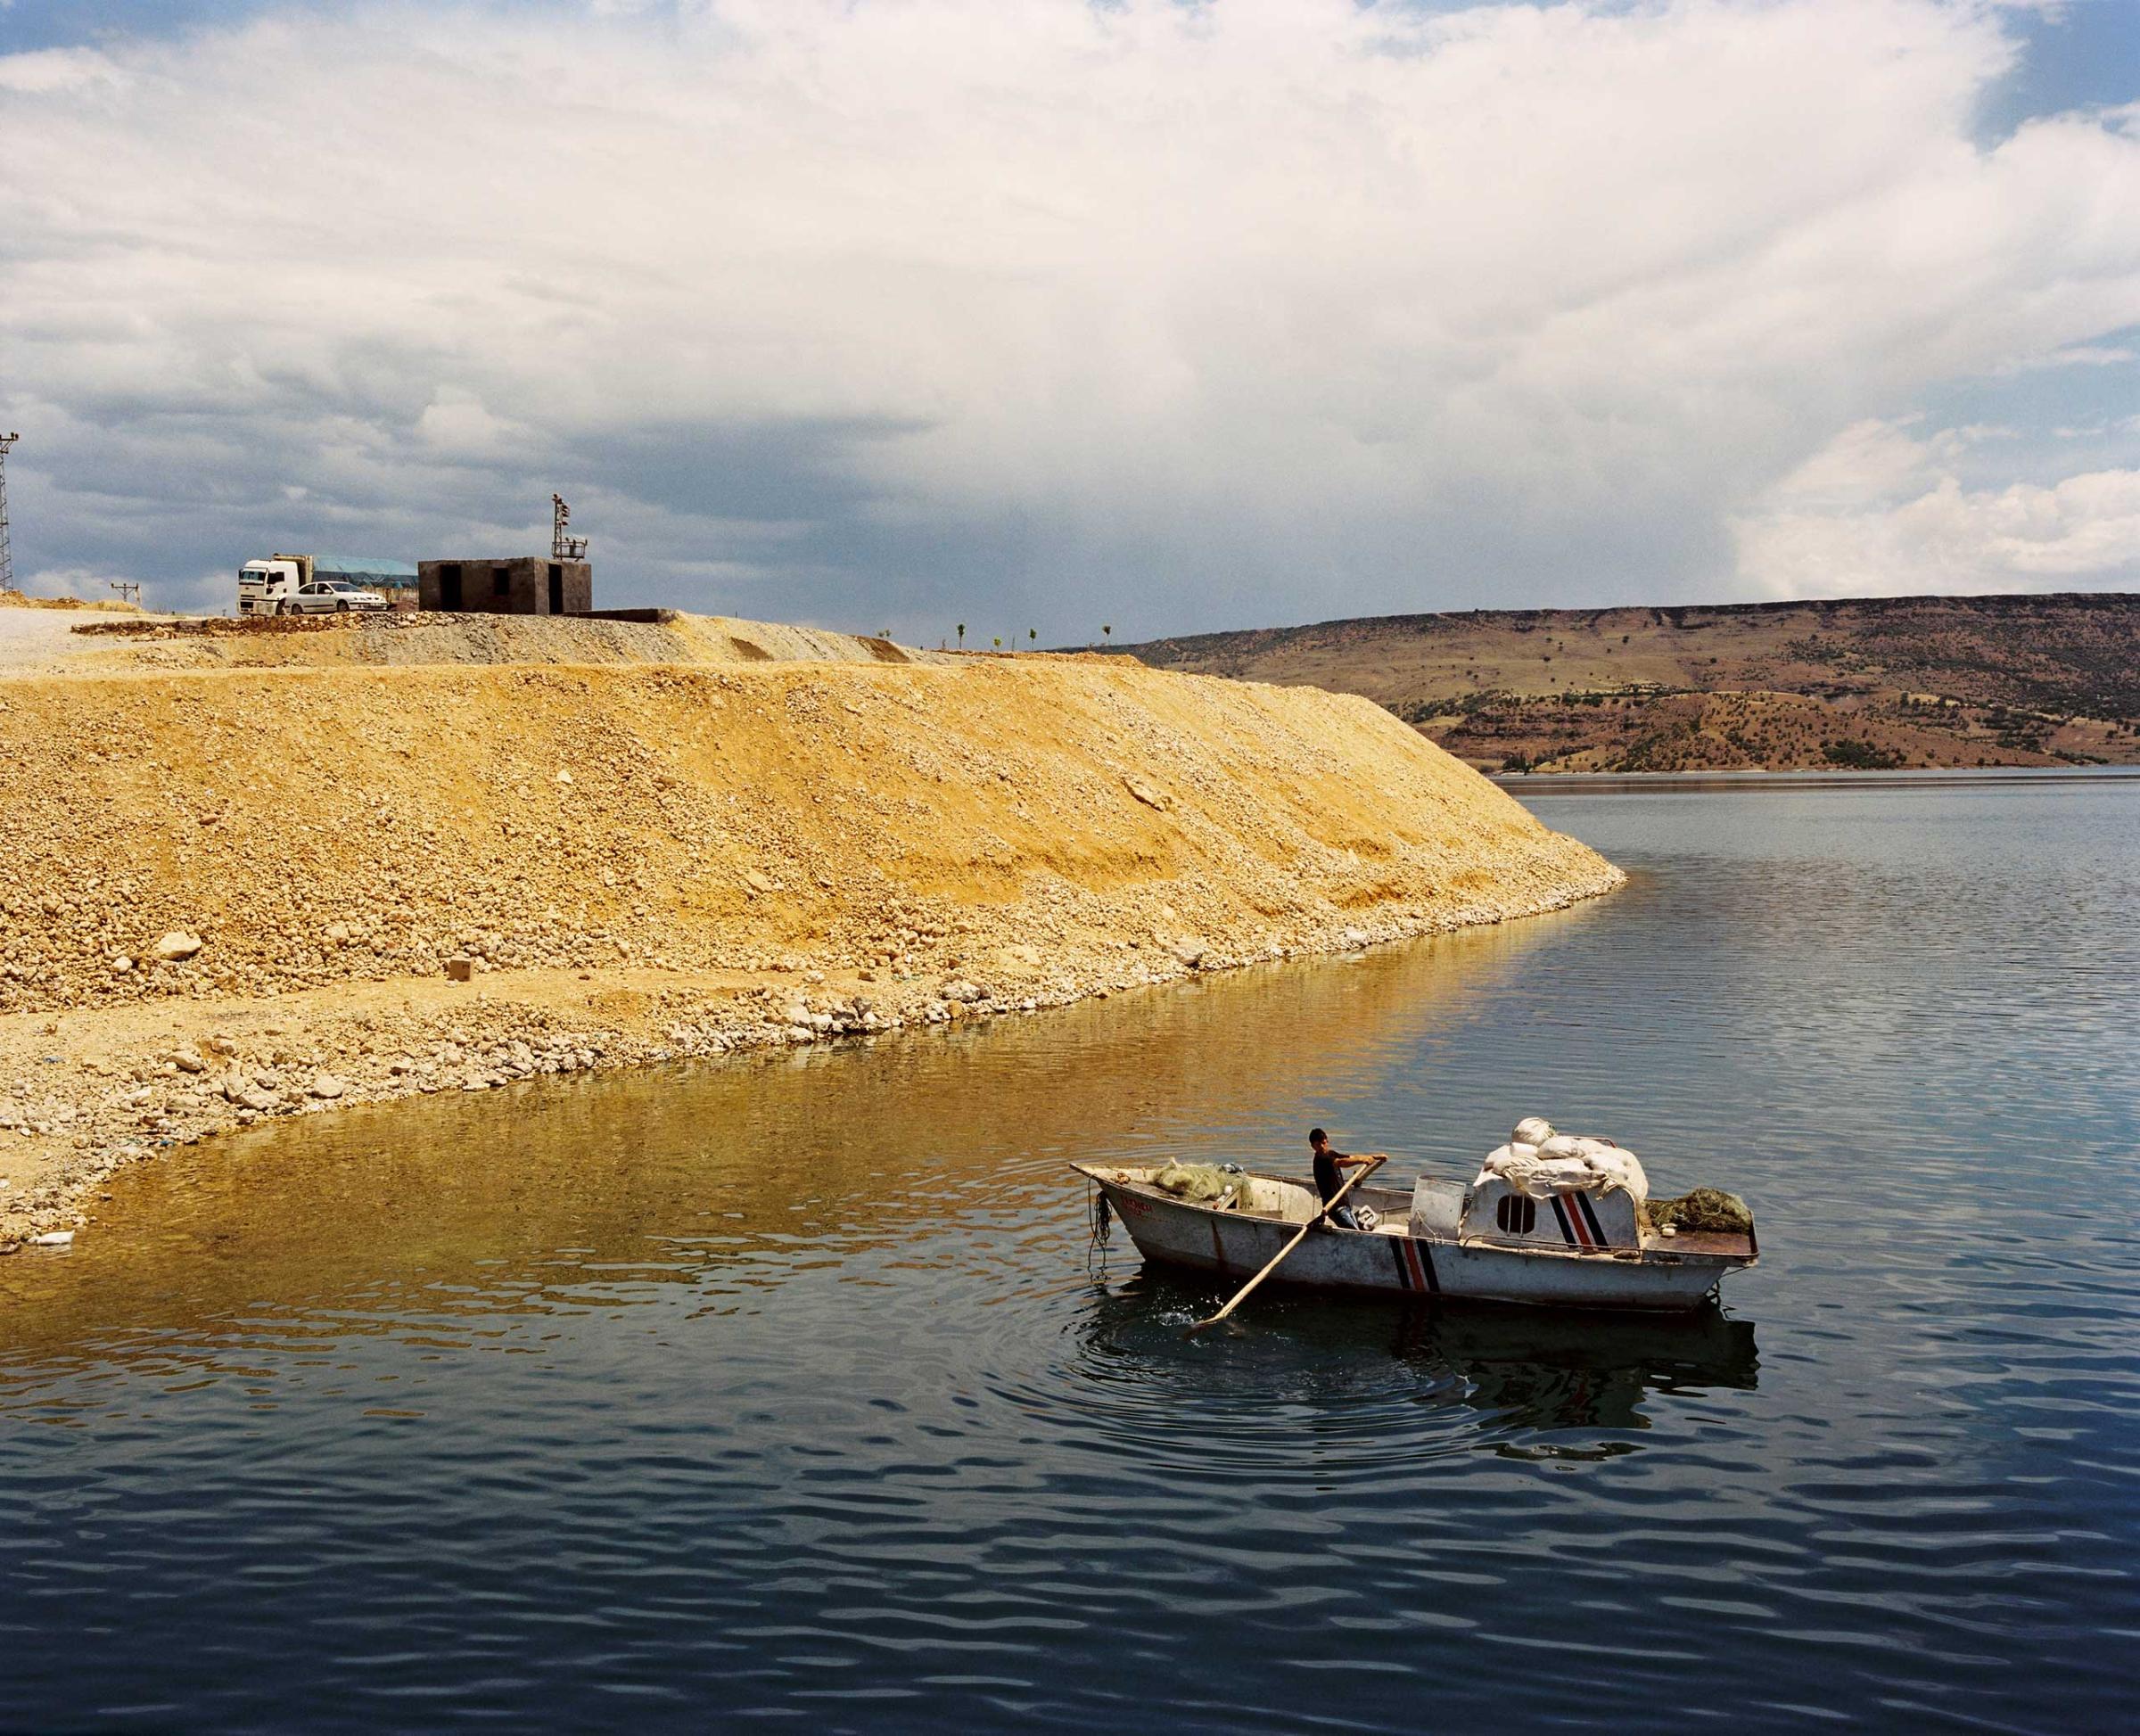 A man paddles in a boat across the Euphrates River near the hydroelectric Keban Dam. Turkey.